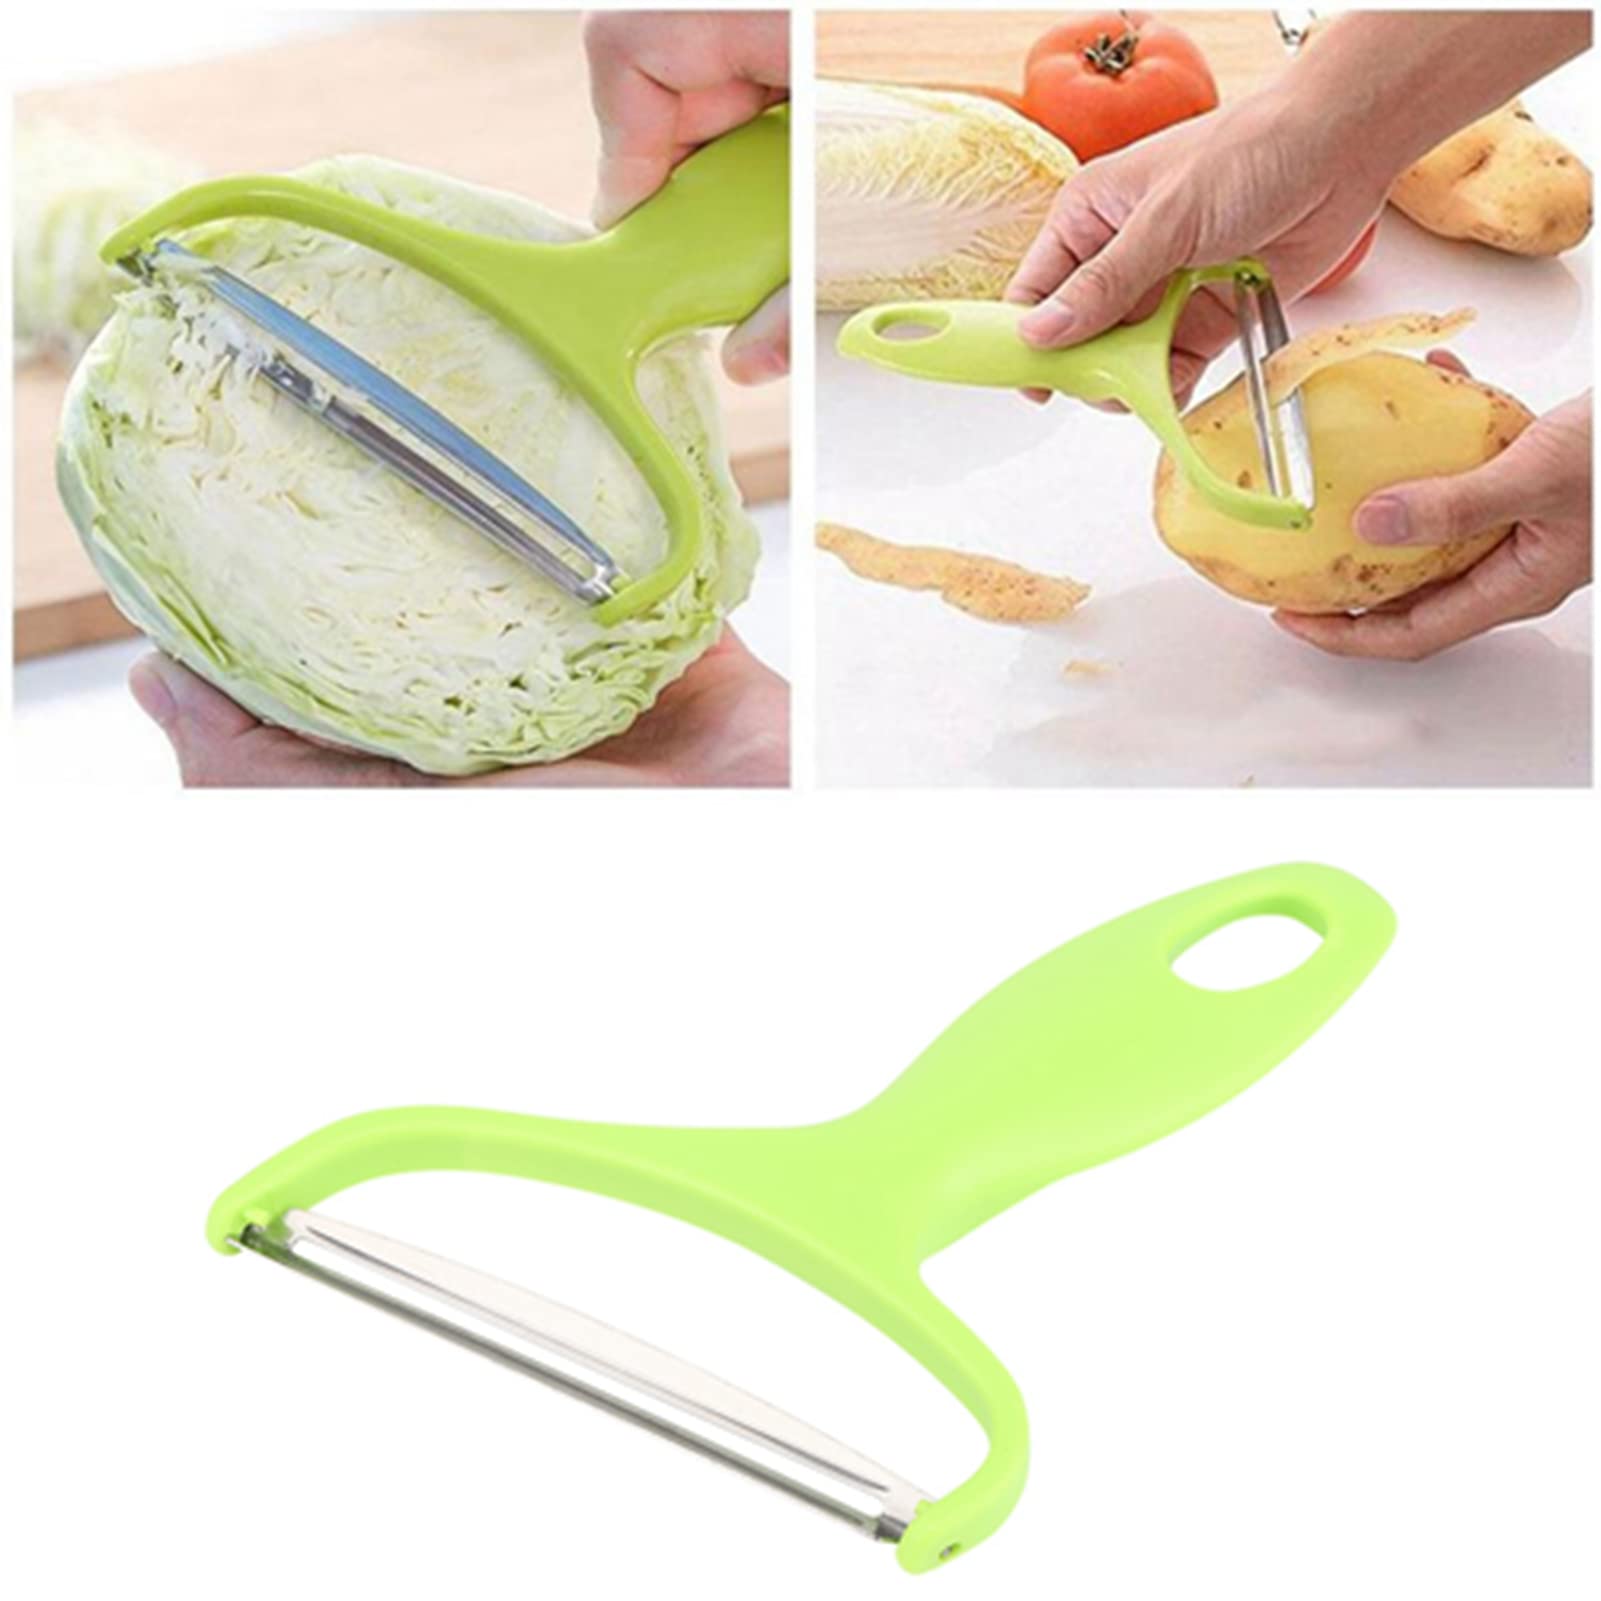 Wide Mouth Vegetable Peeler Parer Cabbage Potato Carrot Graters for Home Kitchen Effortless Peeling